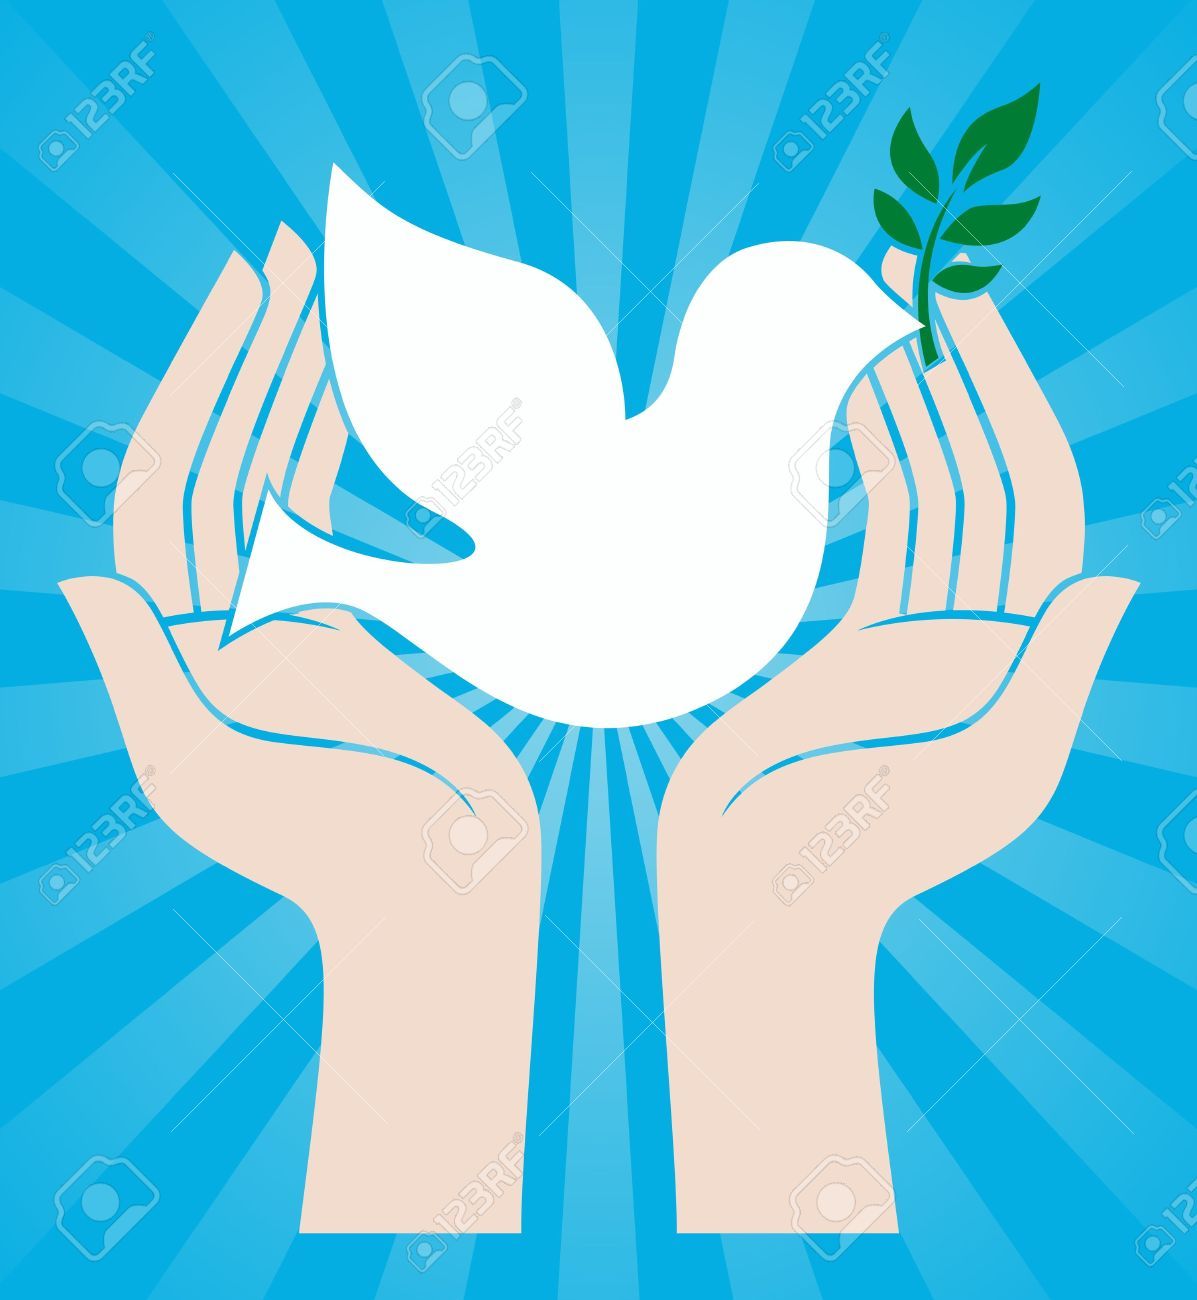 peace clipart holding hands